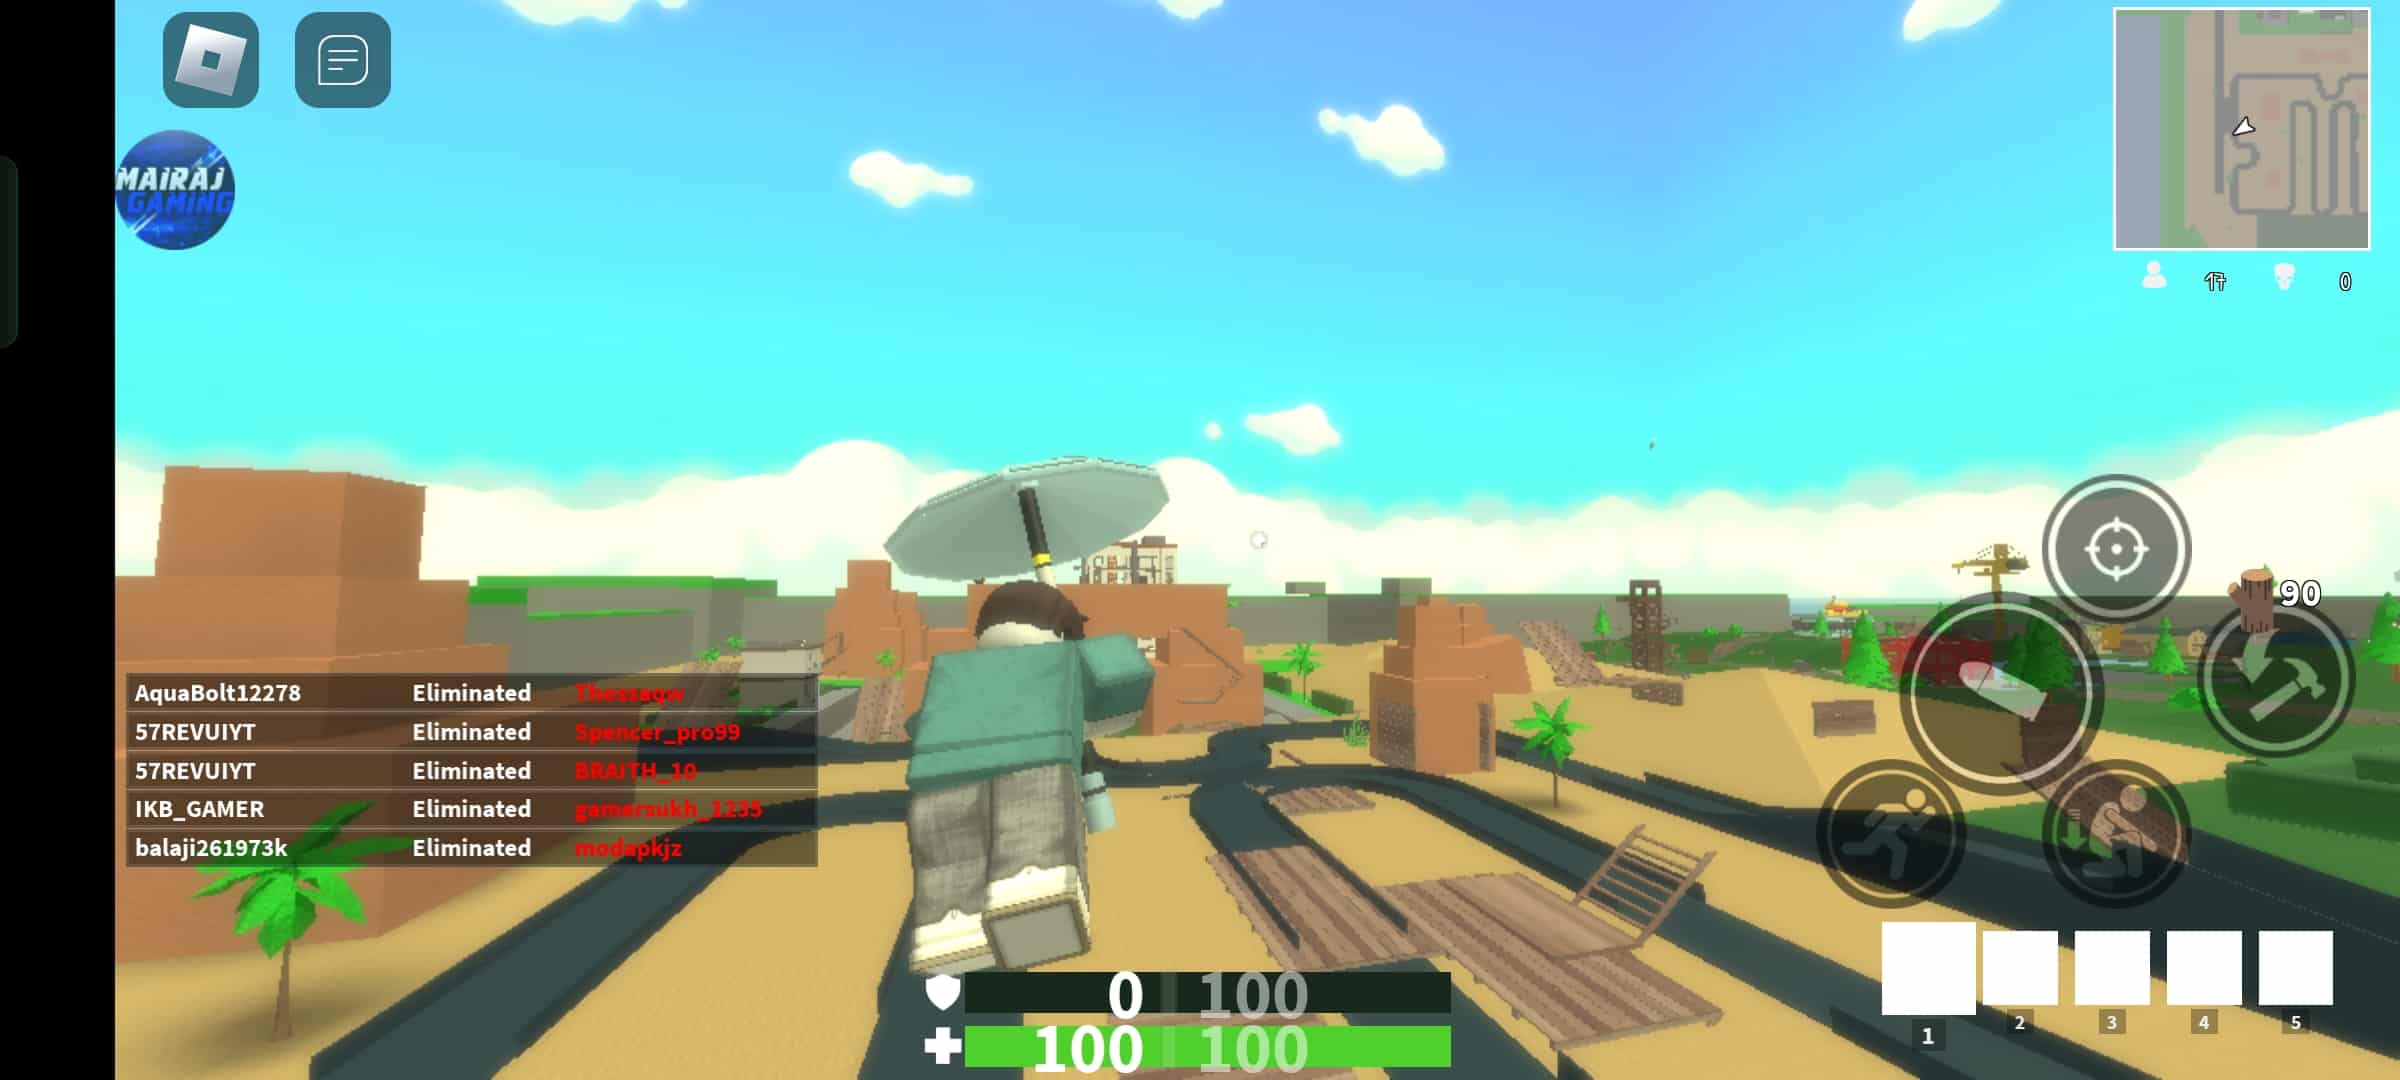 Unlocked all Features in Roblox MOD APK